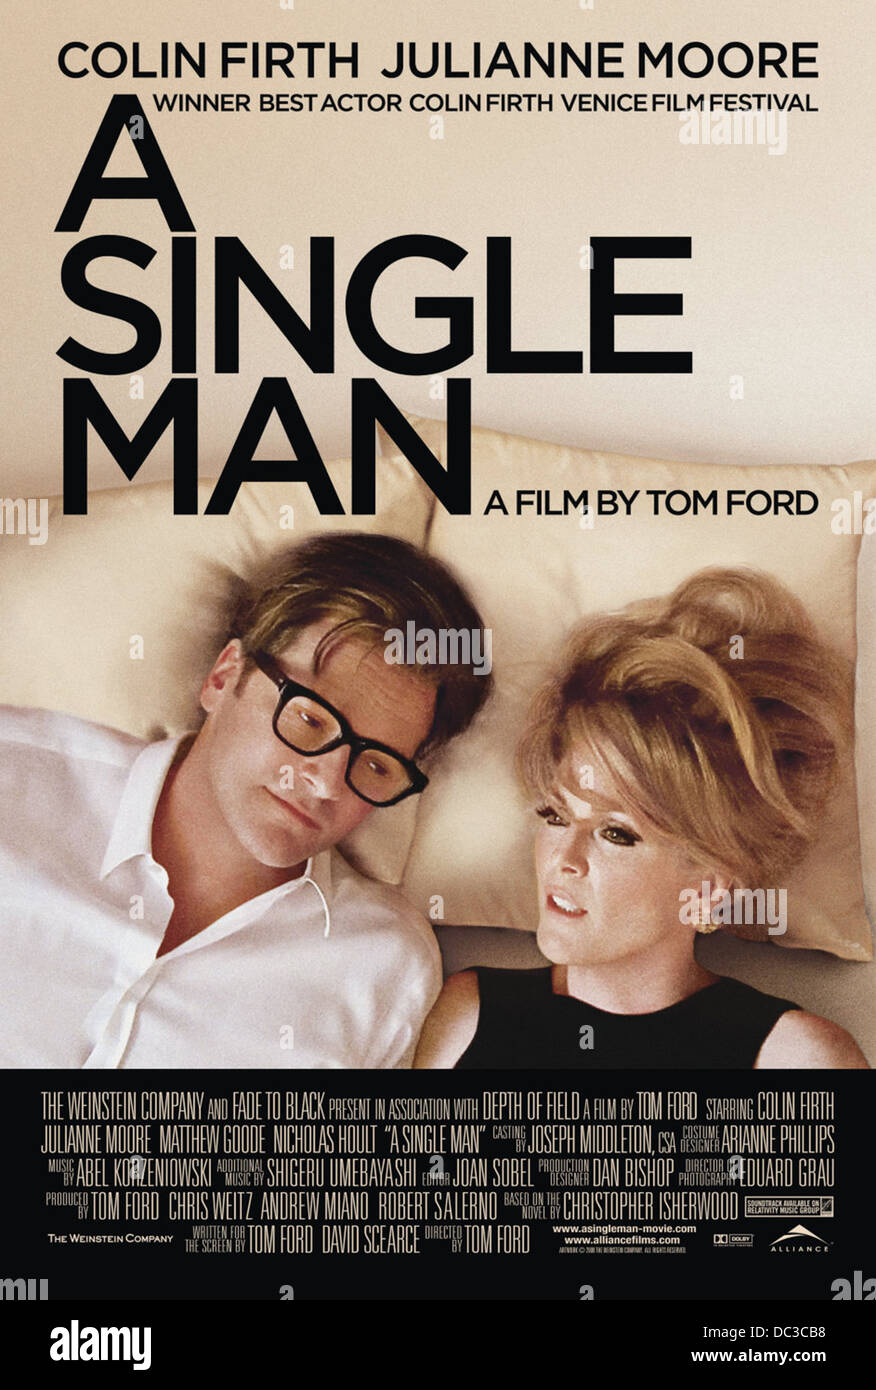 A SINGLE MAN (POSTER) (2009) COLIN FIRTH JULIANNE MOORE TOM FORD (DIR) 010  MOVIESTORE COLLECTION LTD Stock Photo - Alamy